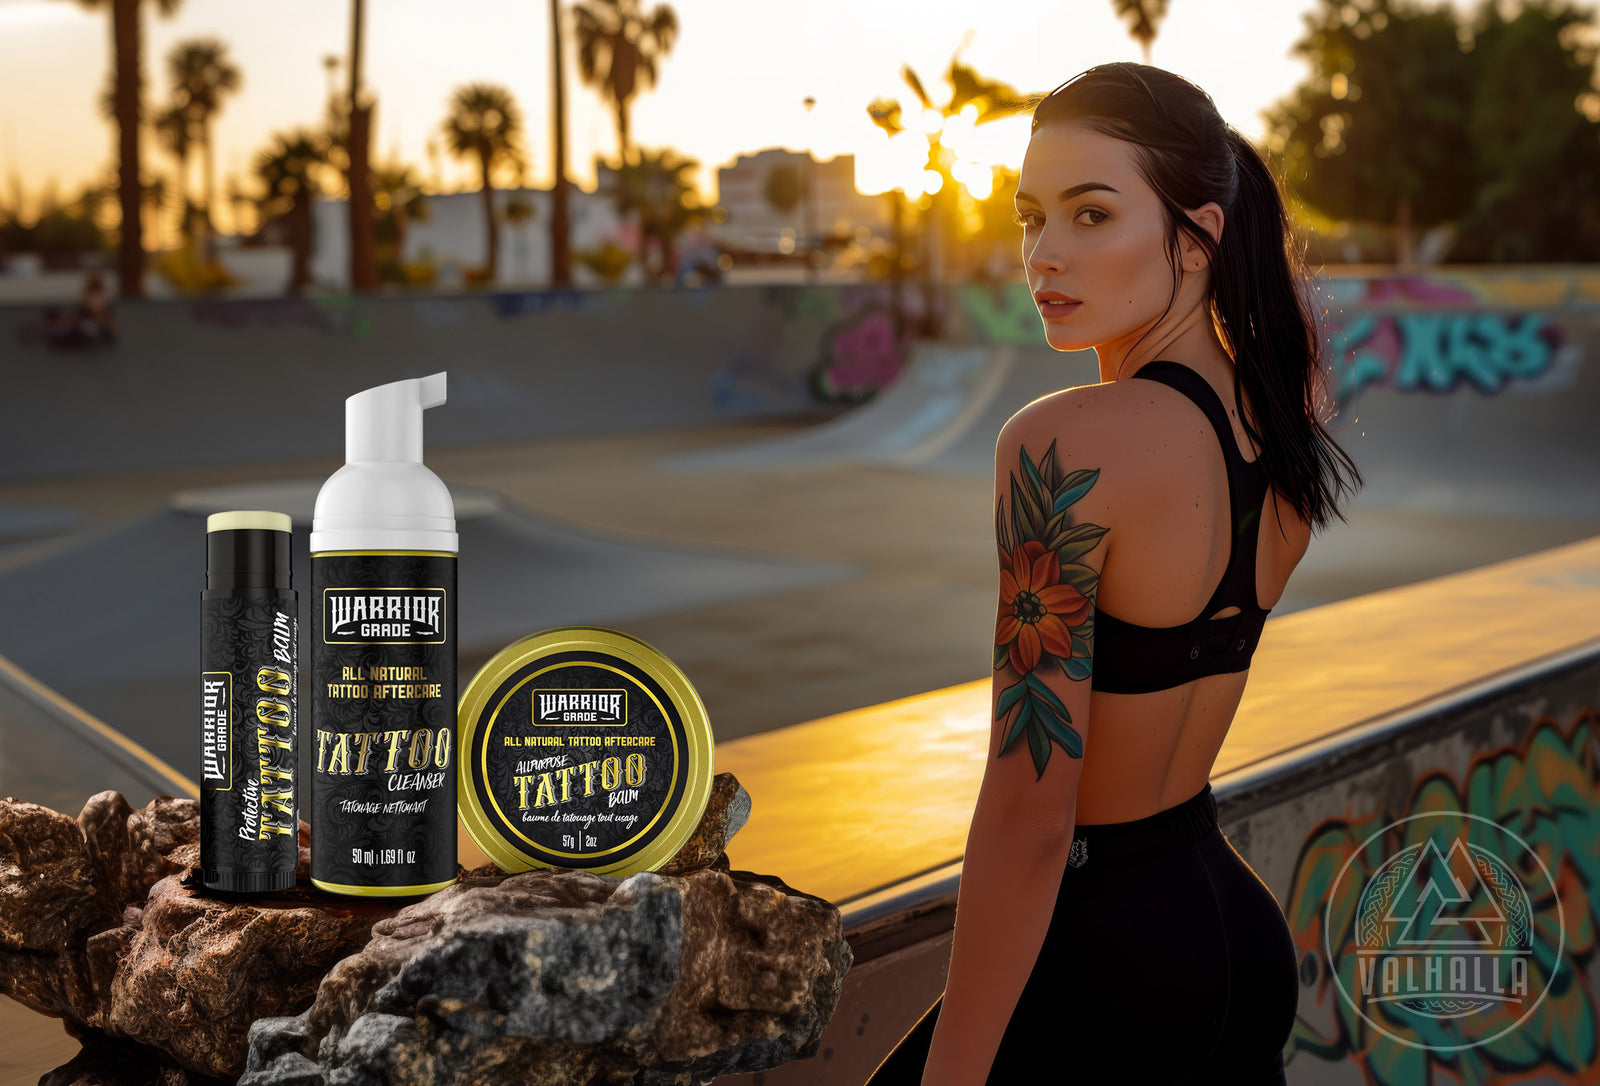 Women at a skate park with black hair and a flower tattoo on her arm, with the sunset in the background, Valhalla Live the Legends Tattoo Aftercare Products sitting on a rock in the foreground.